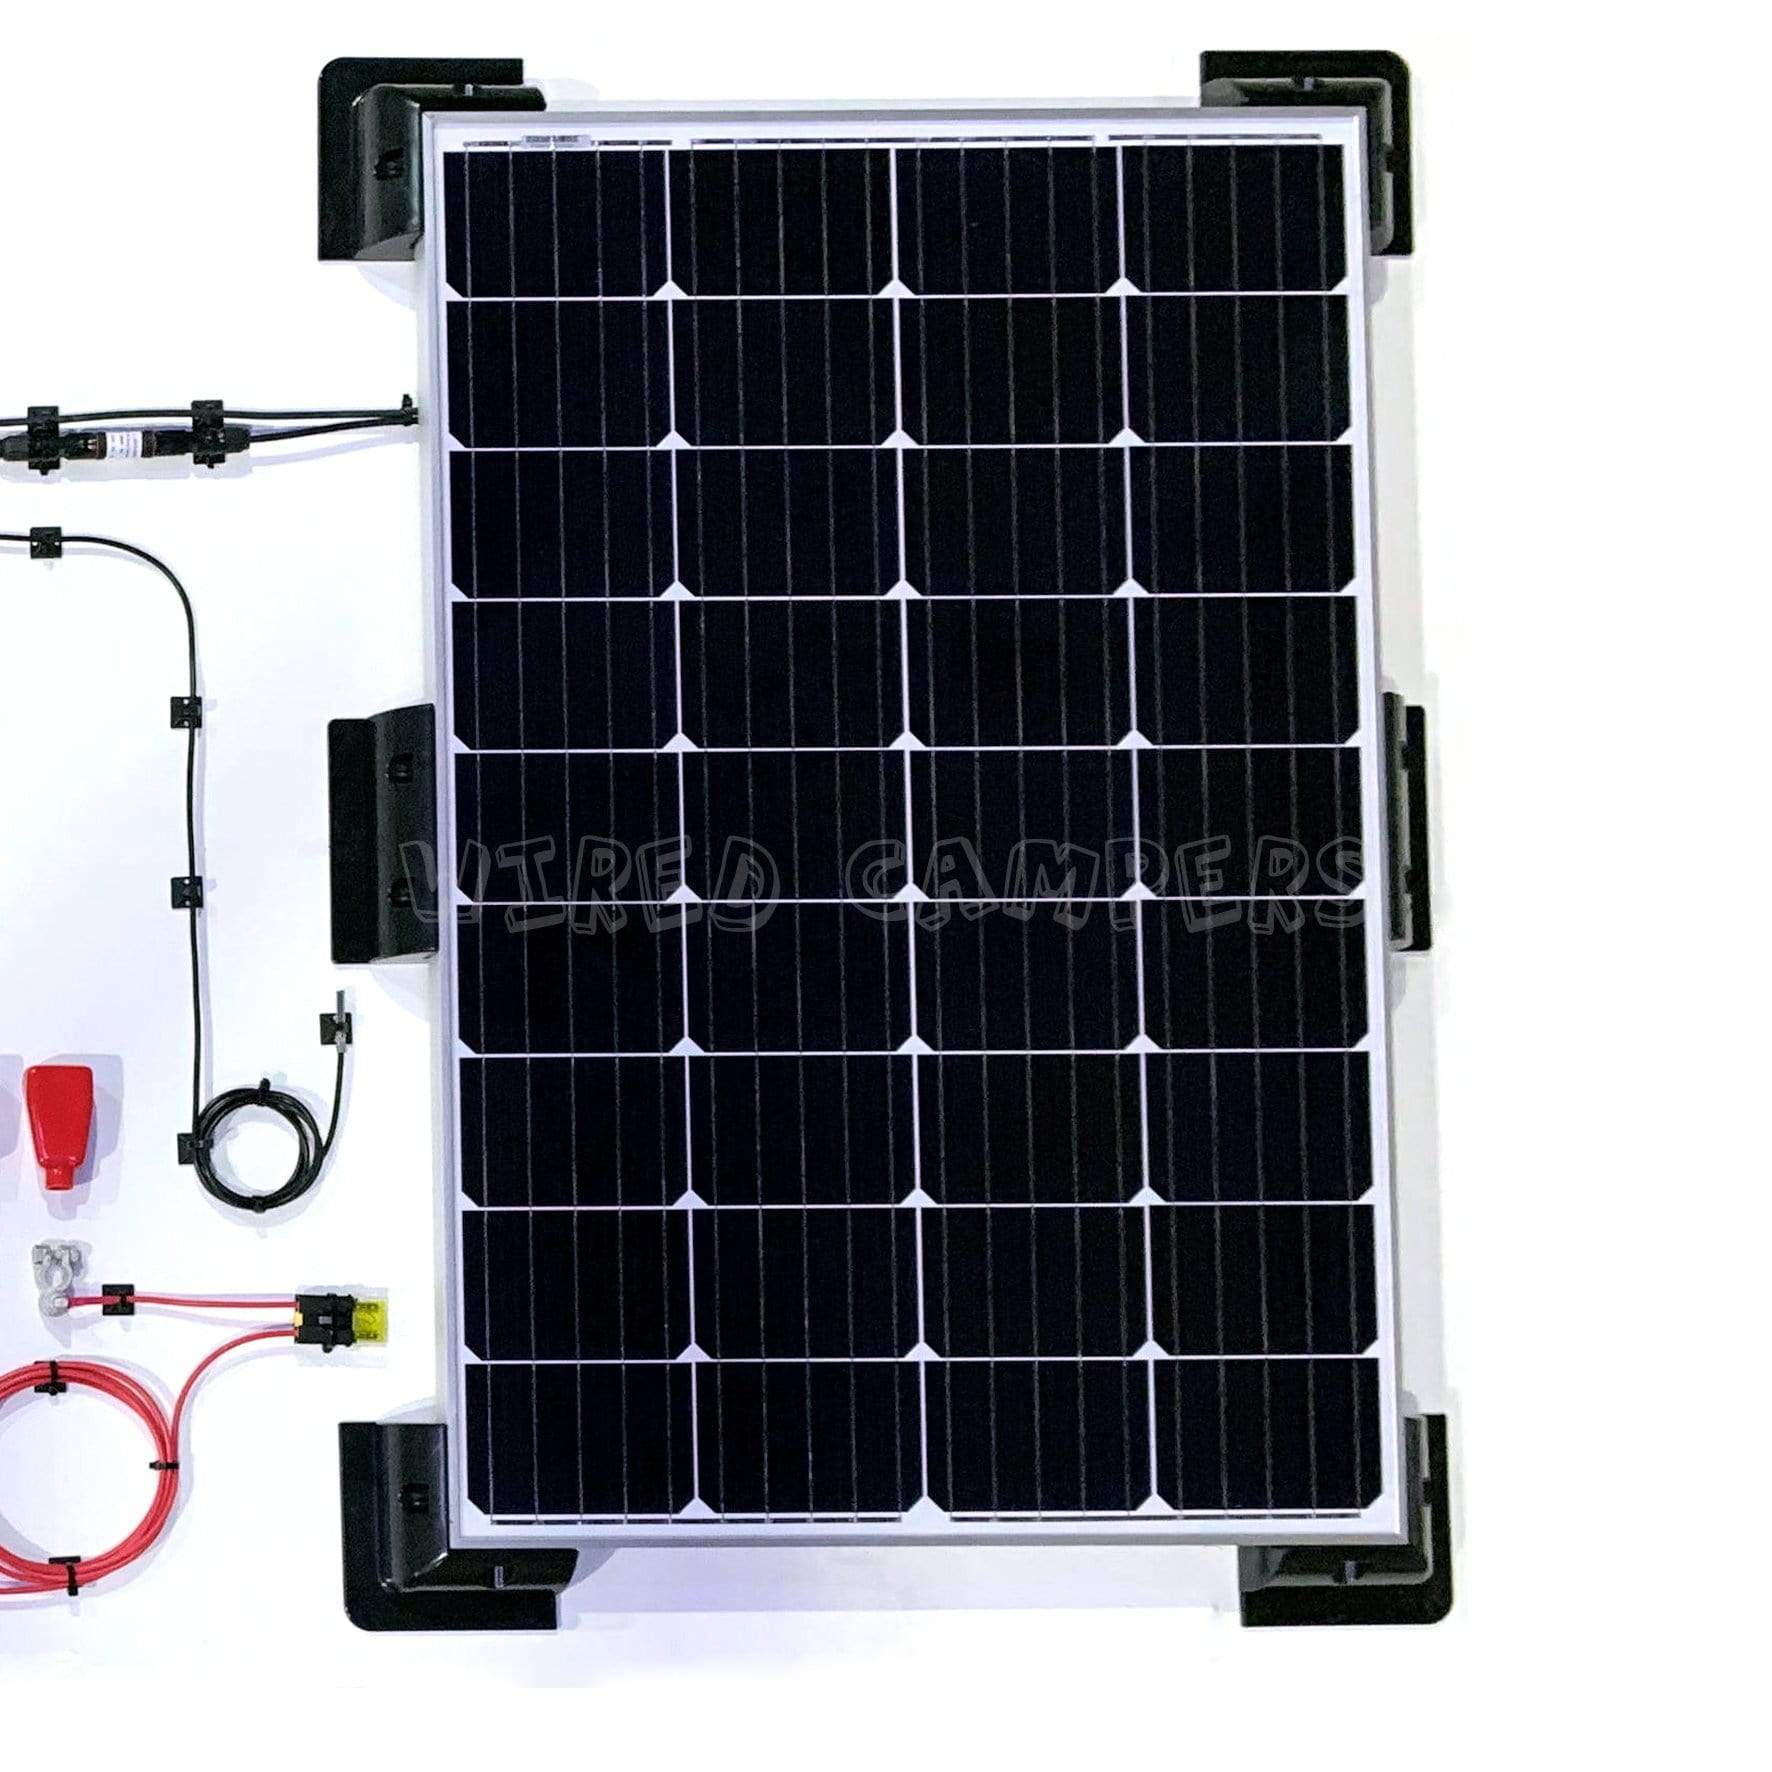 Wired Campers Solar Complete 260W Dual Solar Panel MPPT Camper Van Kit With Control Panel